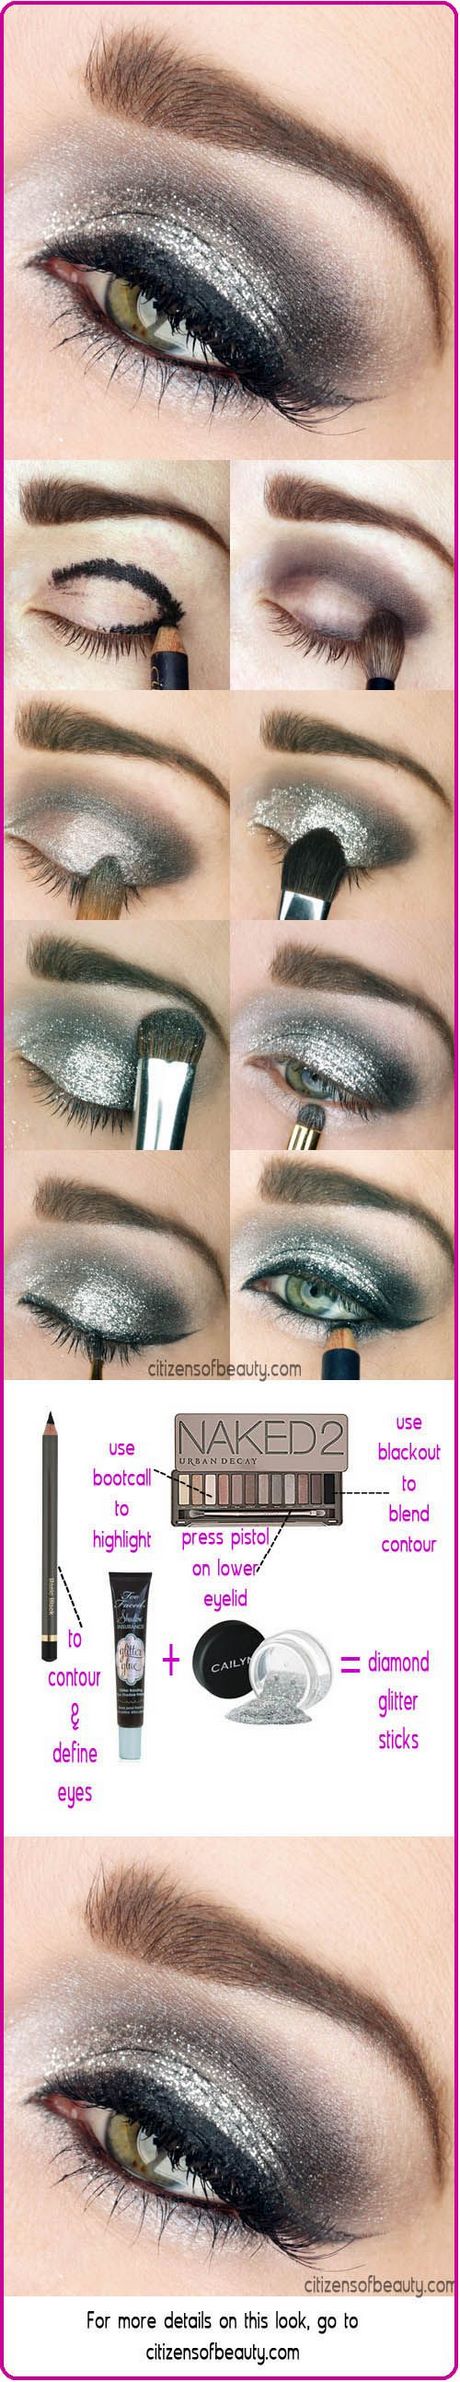 2023-new-years-eve-makeup-tutorial-48 2023 new years eve make-up tutorial